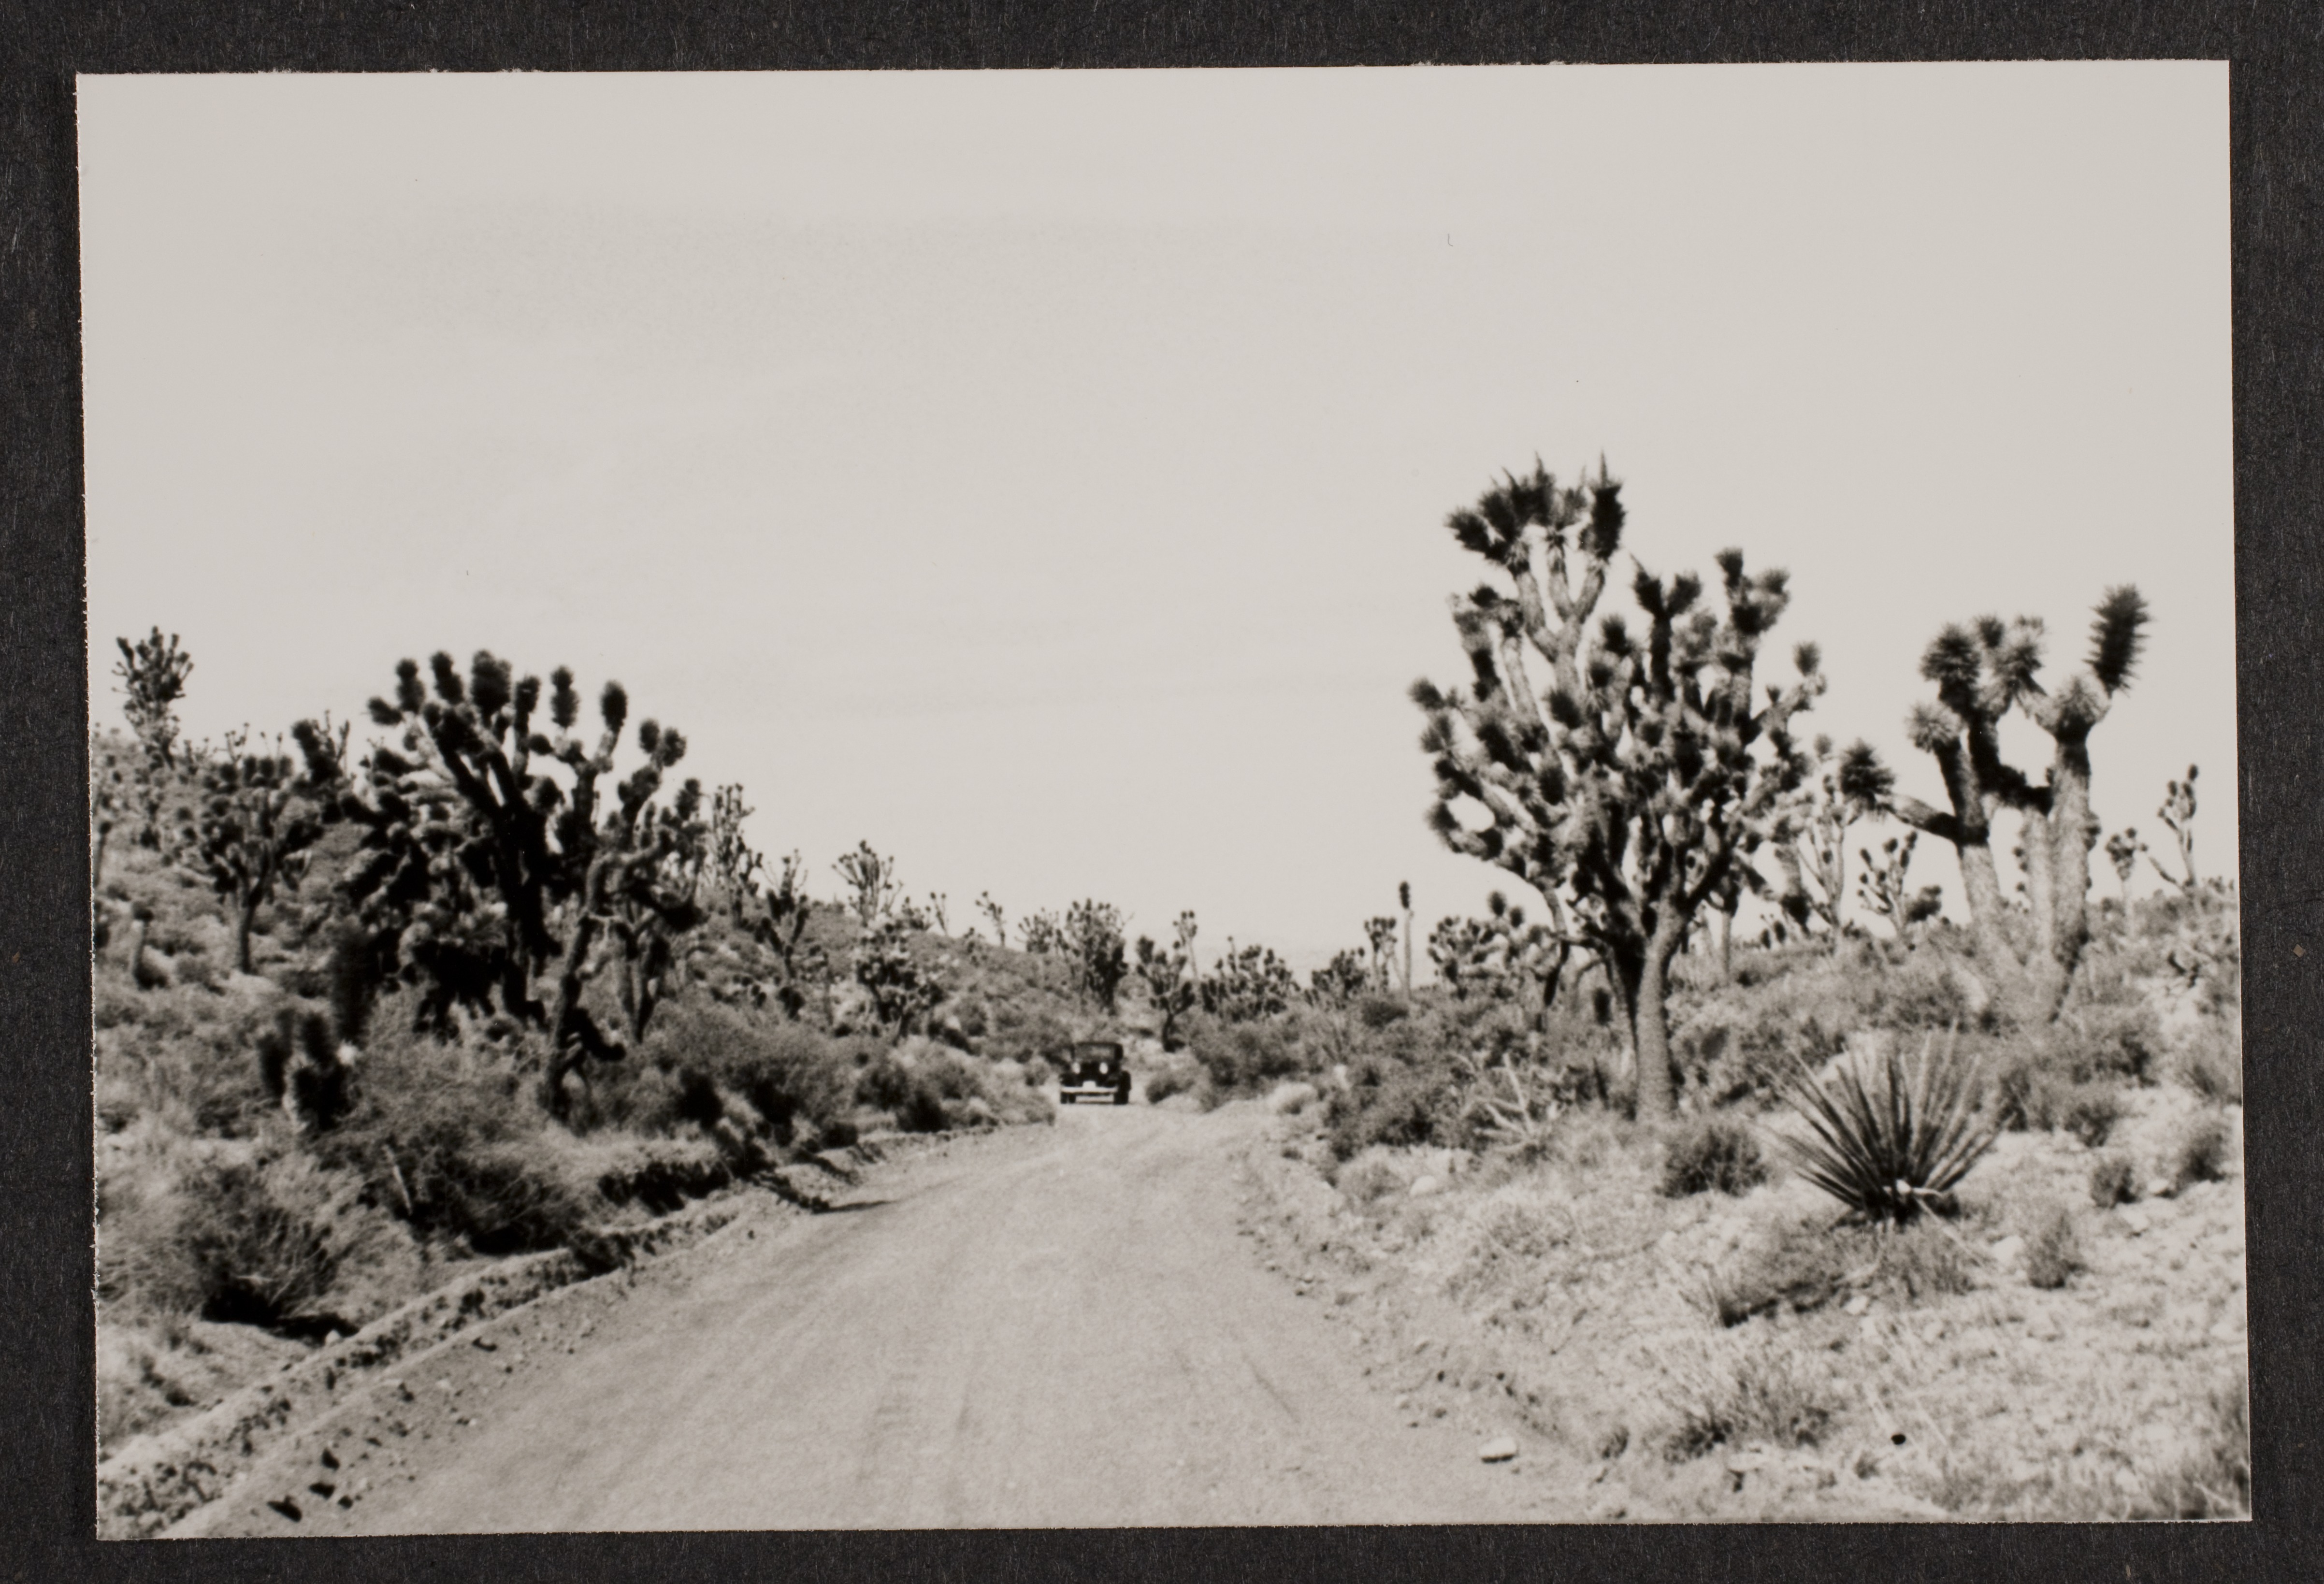 Car coming down dirt road in the Mojave Desert: photographic print